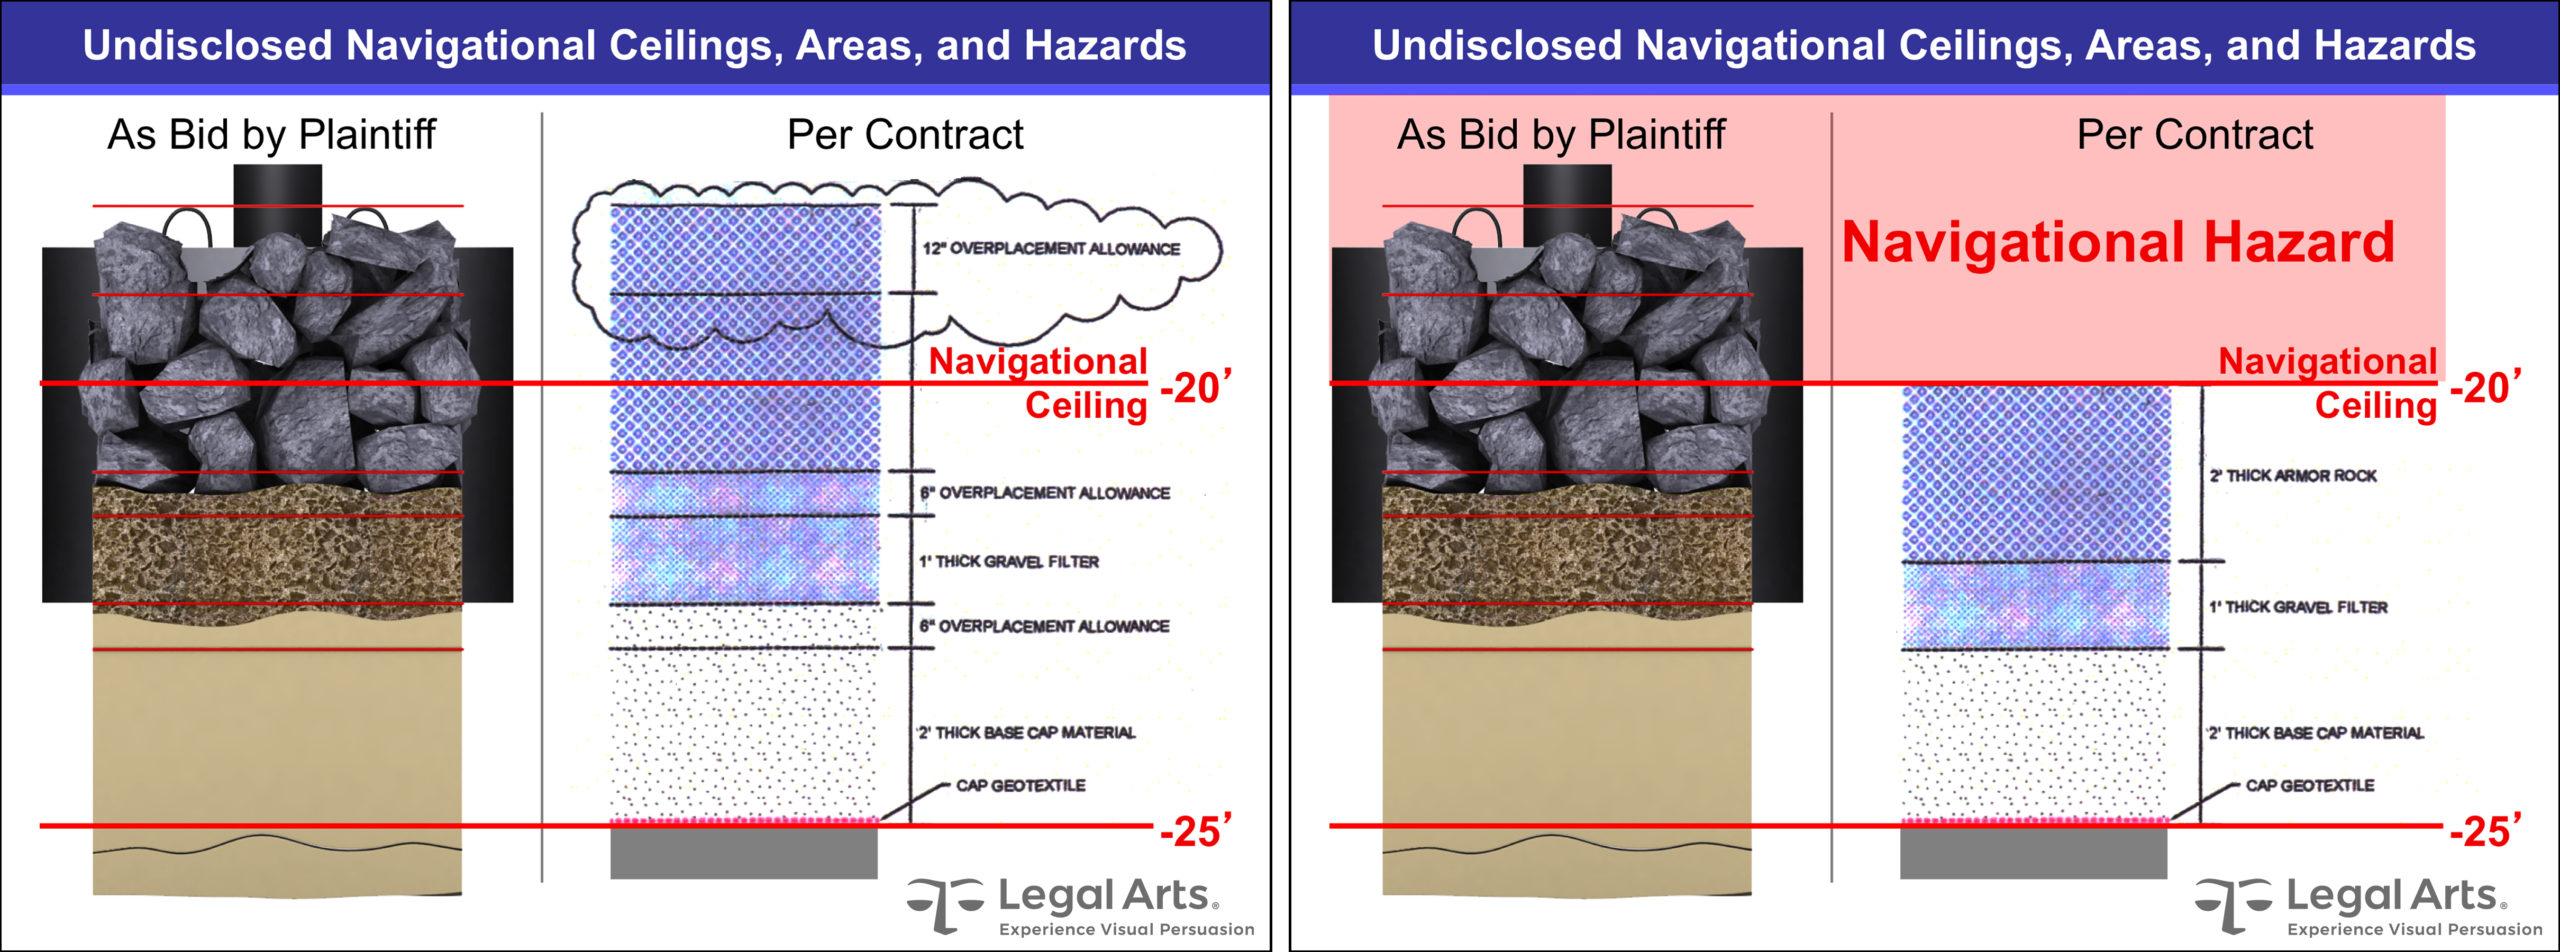 The defendant Port's plan for dozens of vents (left) if built by the plaintiff contractor, would have resulted in an unacceptable dangerous navigational hazard (right).